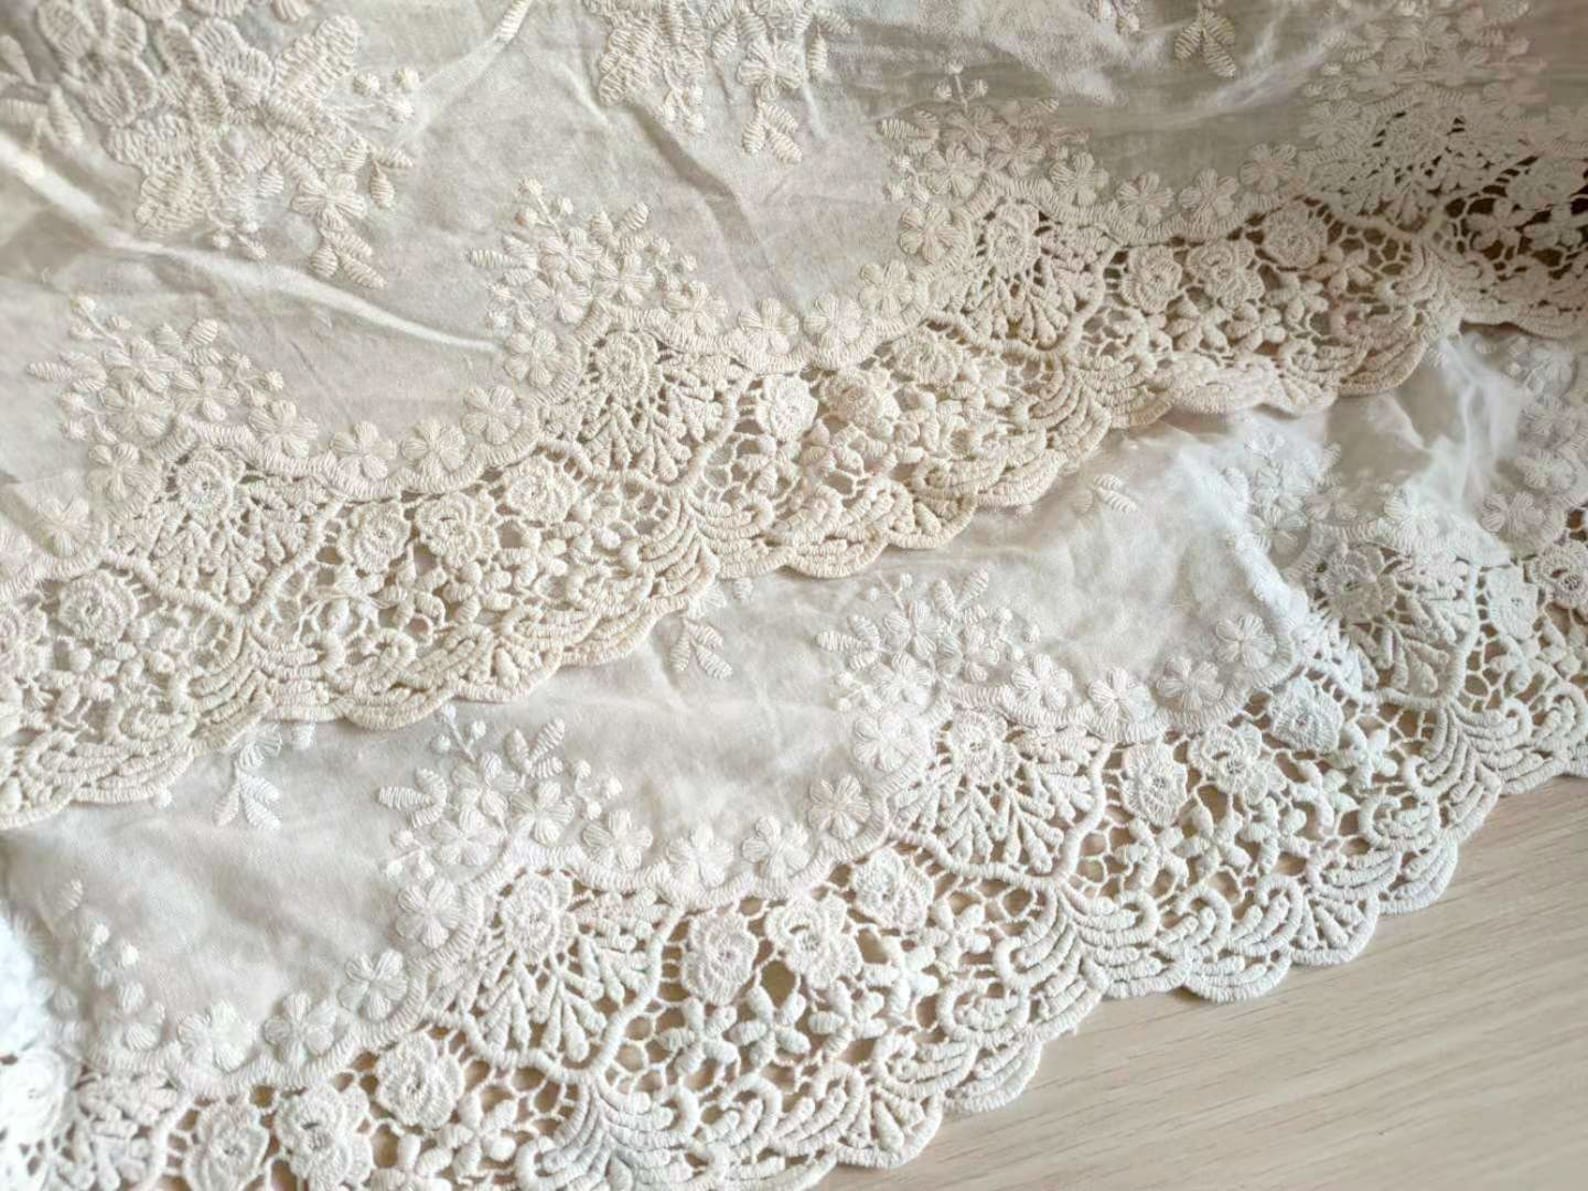 Wide Lace Trim Cotton Floral Embroidered Fabric Lace 13 - Etsy